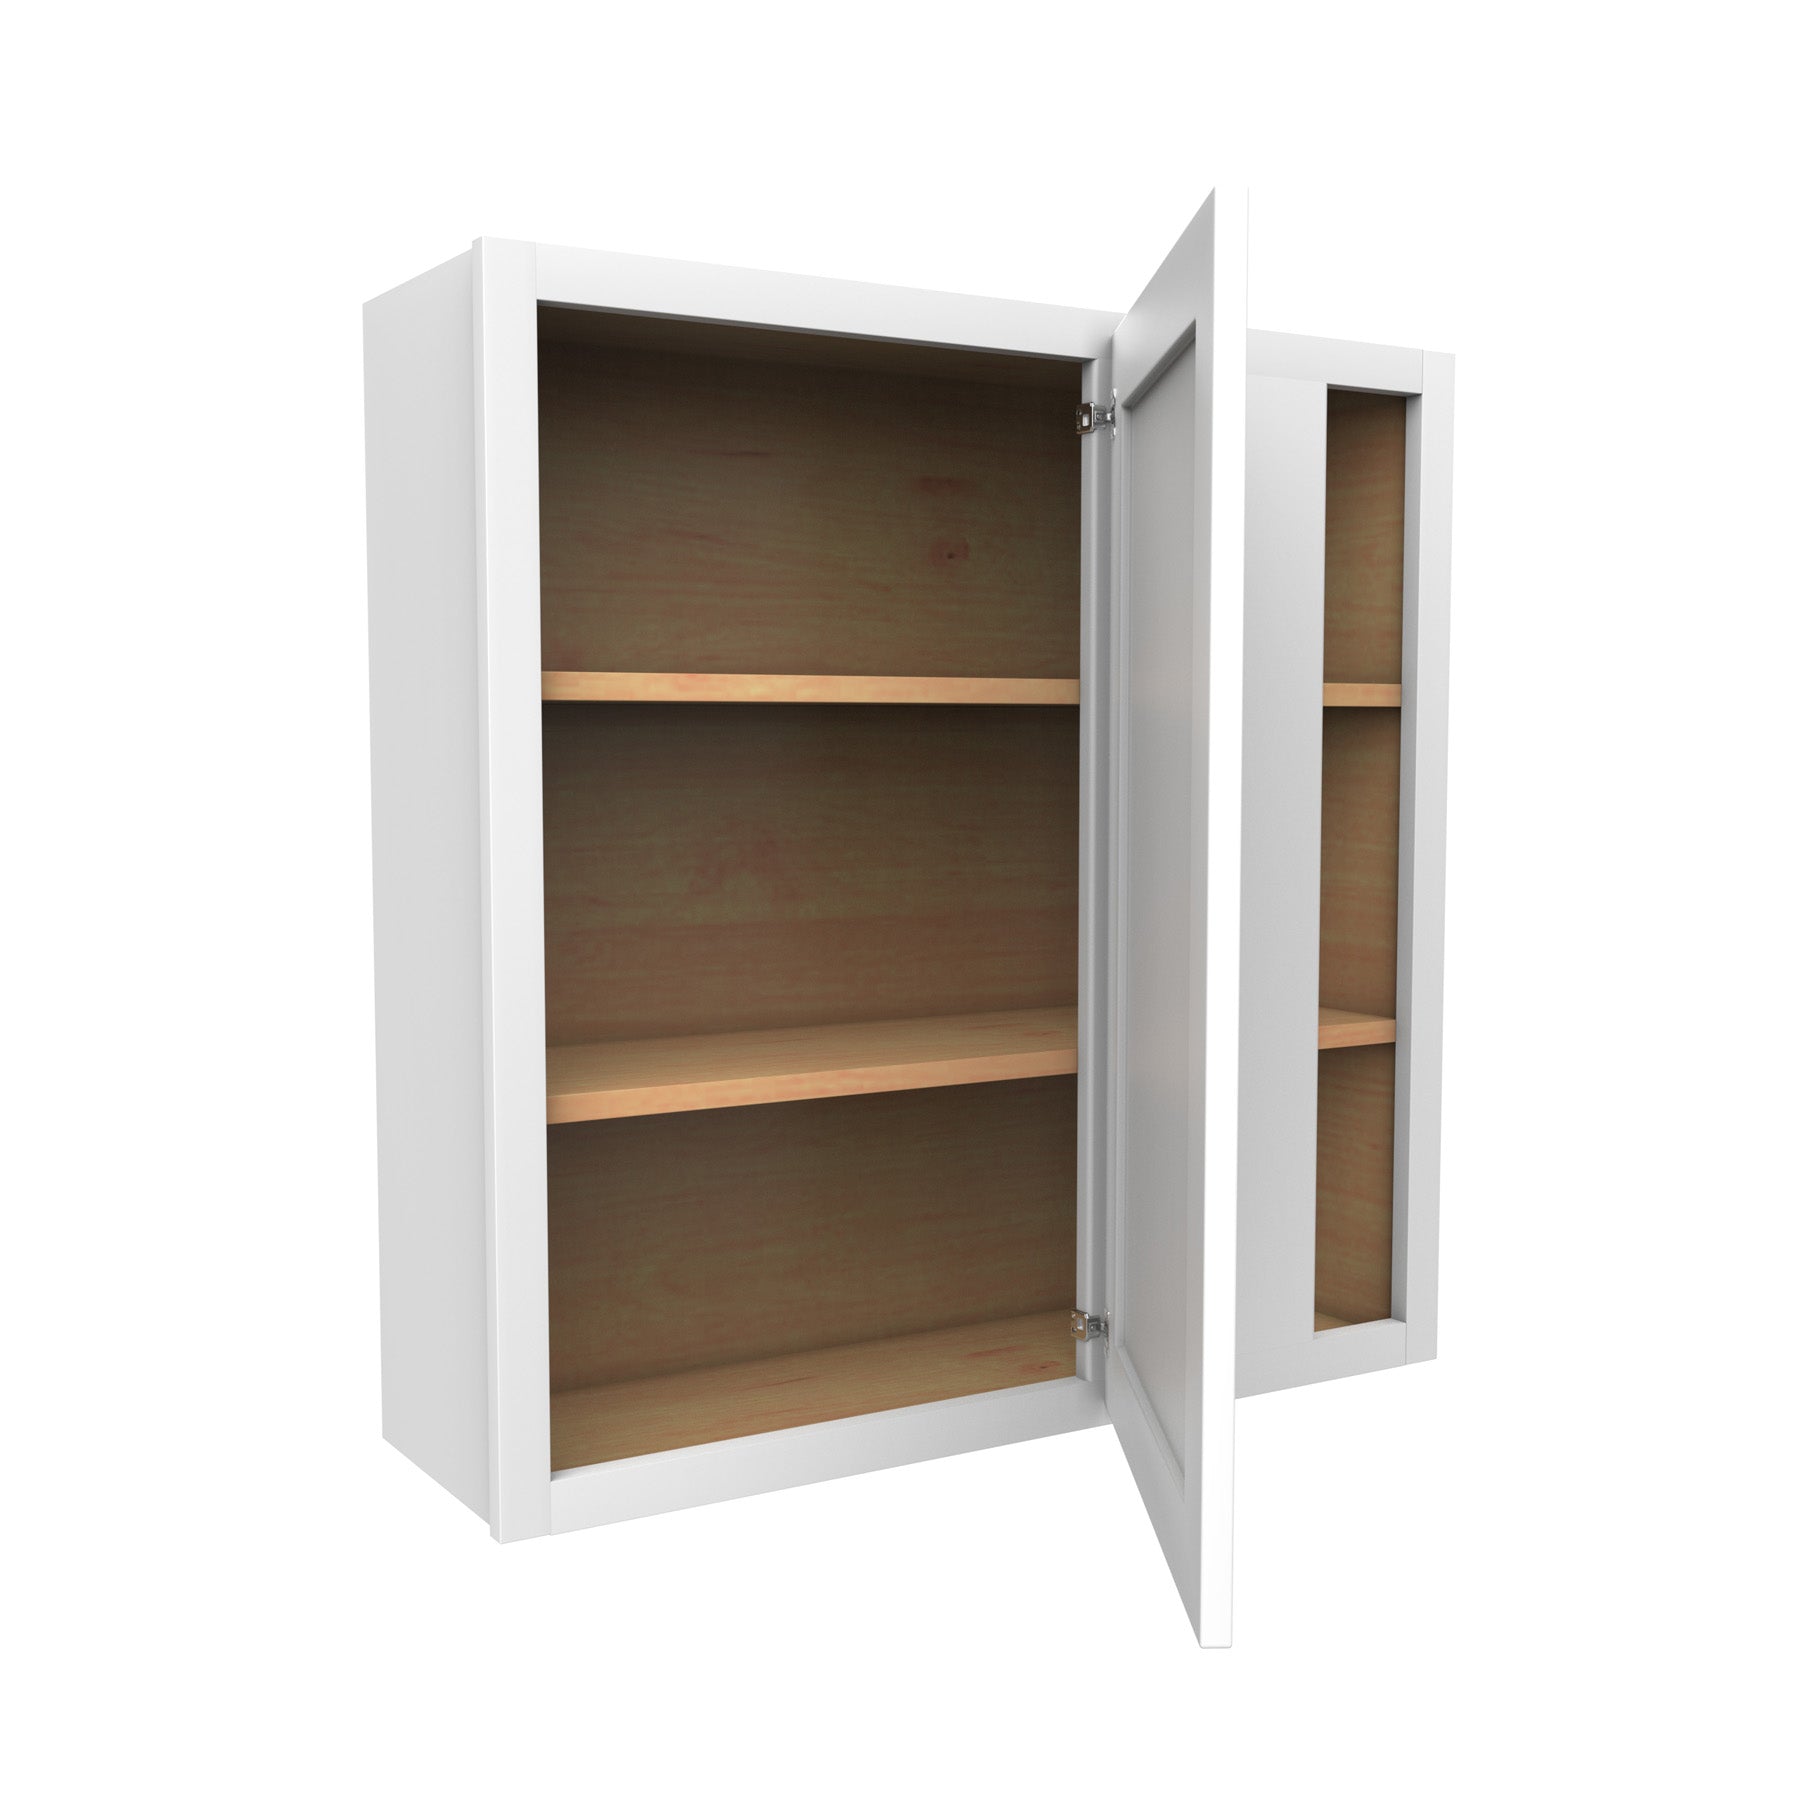 Luxor White - Blind Wall Cabinet | 36"W x 36"H x 12"D